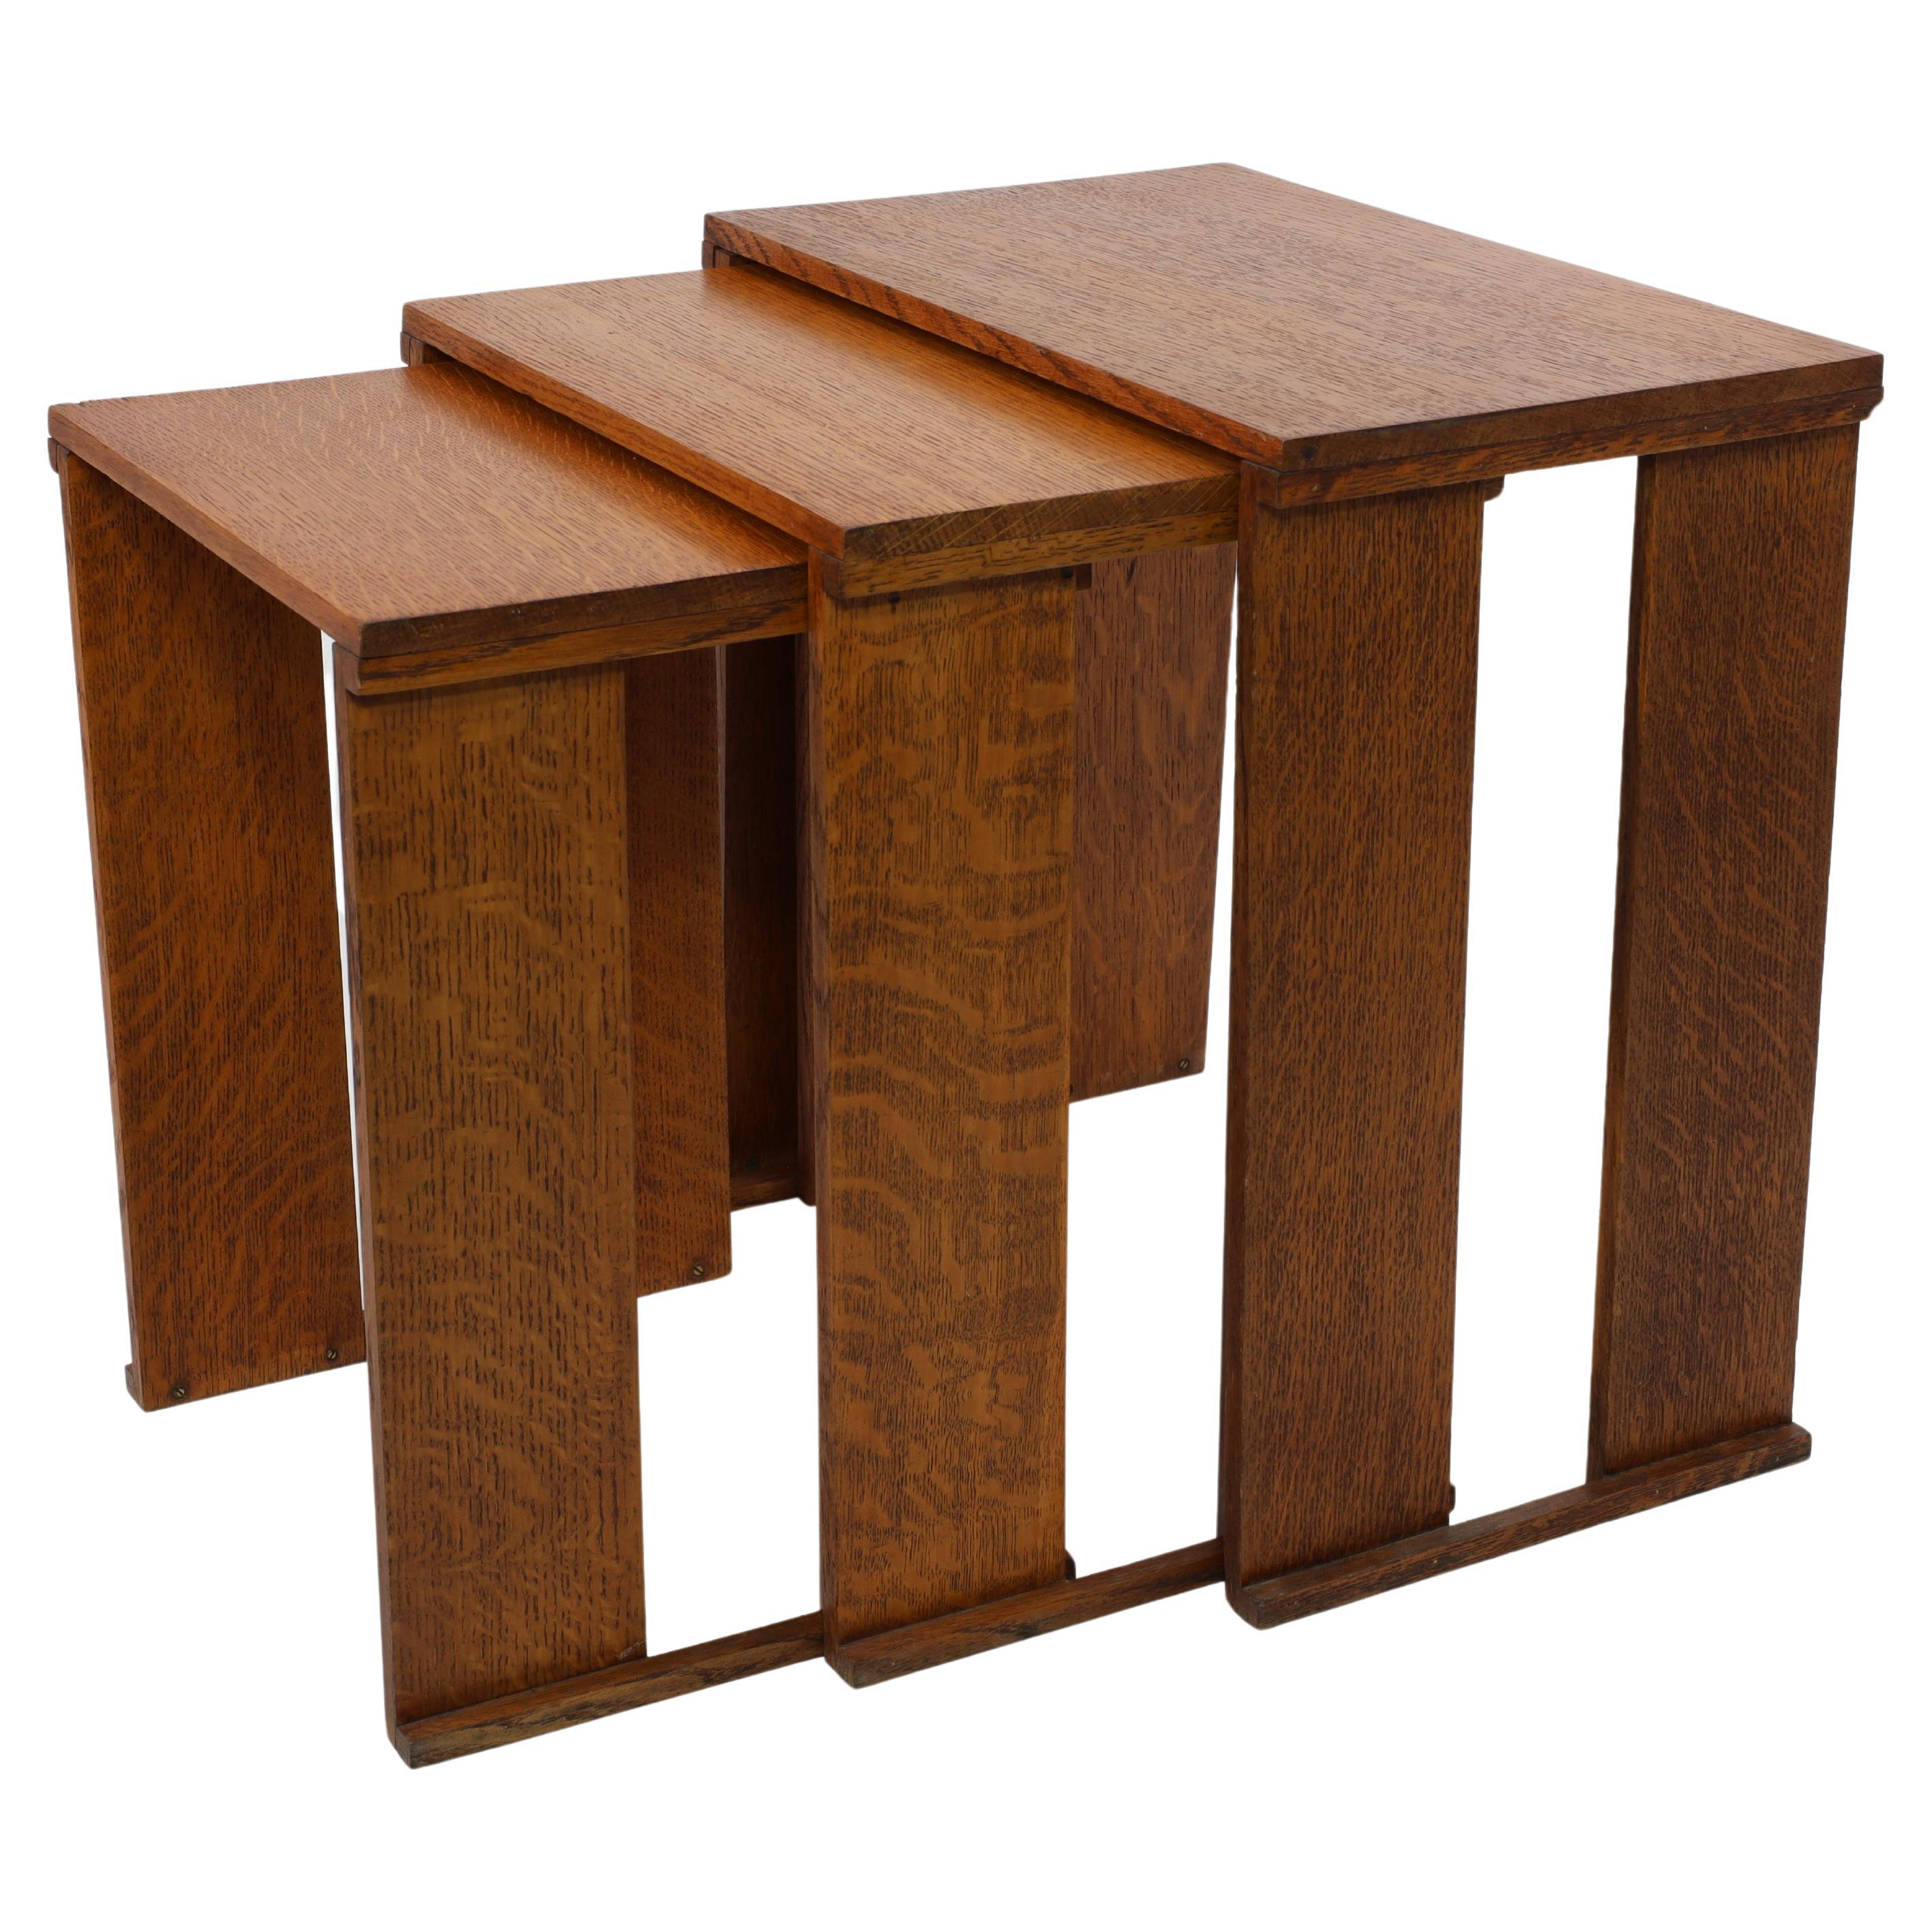 A nest of three Art Deco wild grain oak side tables of planked construction.